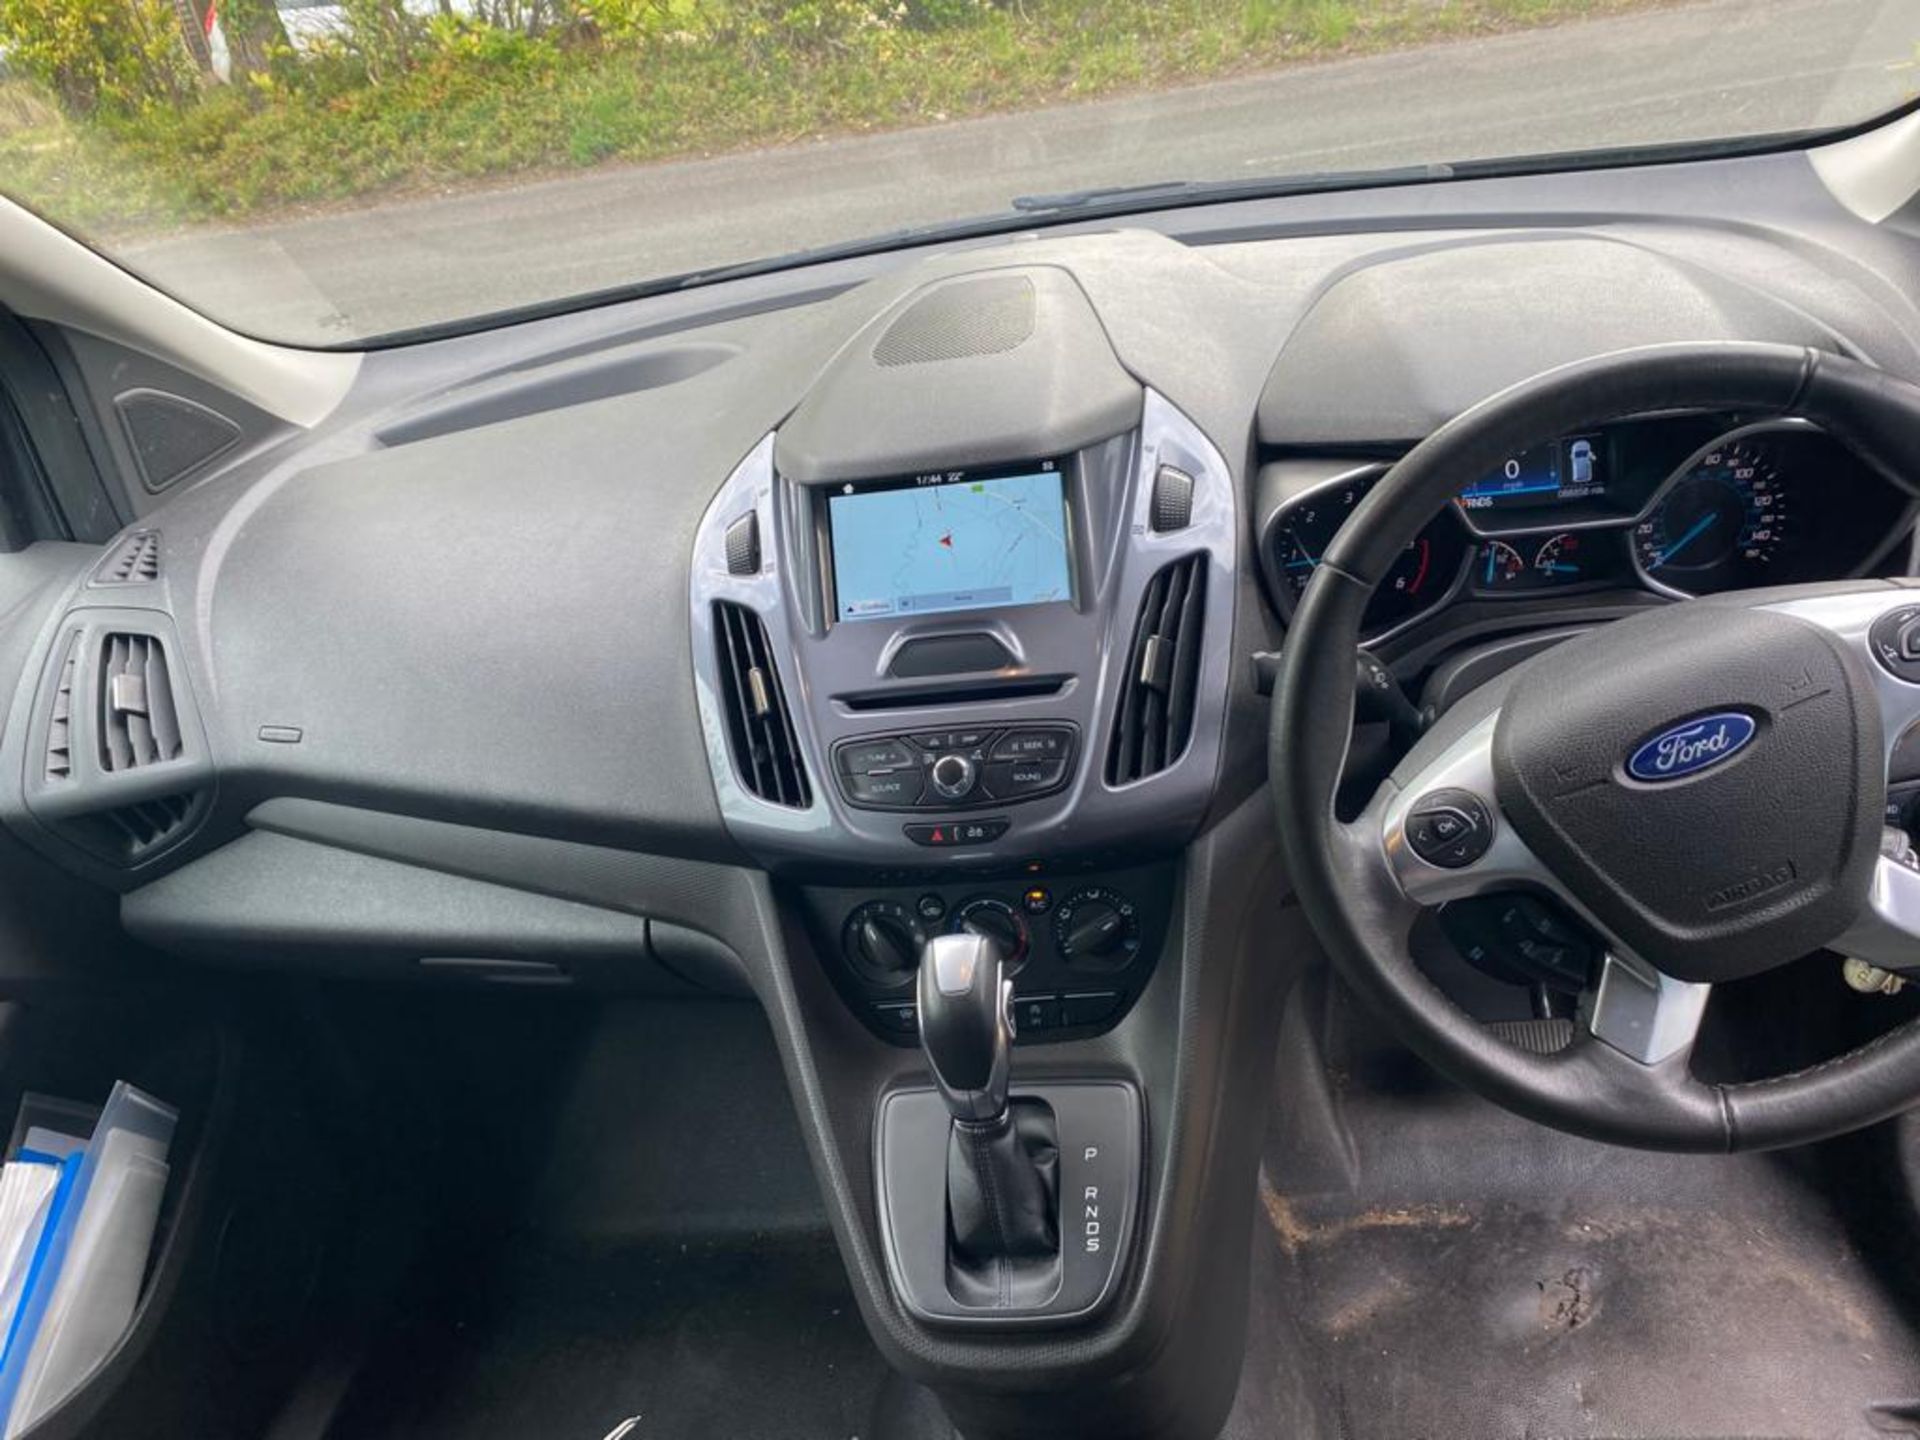 2018 (18) FORD TRANSIT CONNECT 200 LIMITED A, 65,000 MILES WARRANTED, 1499CC DIESEL ENGINE *PLUS VAT - Image 11 of 21